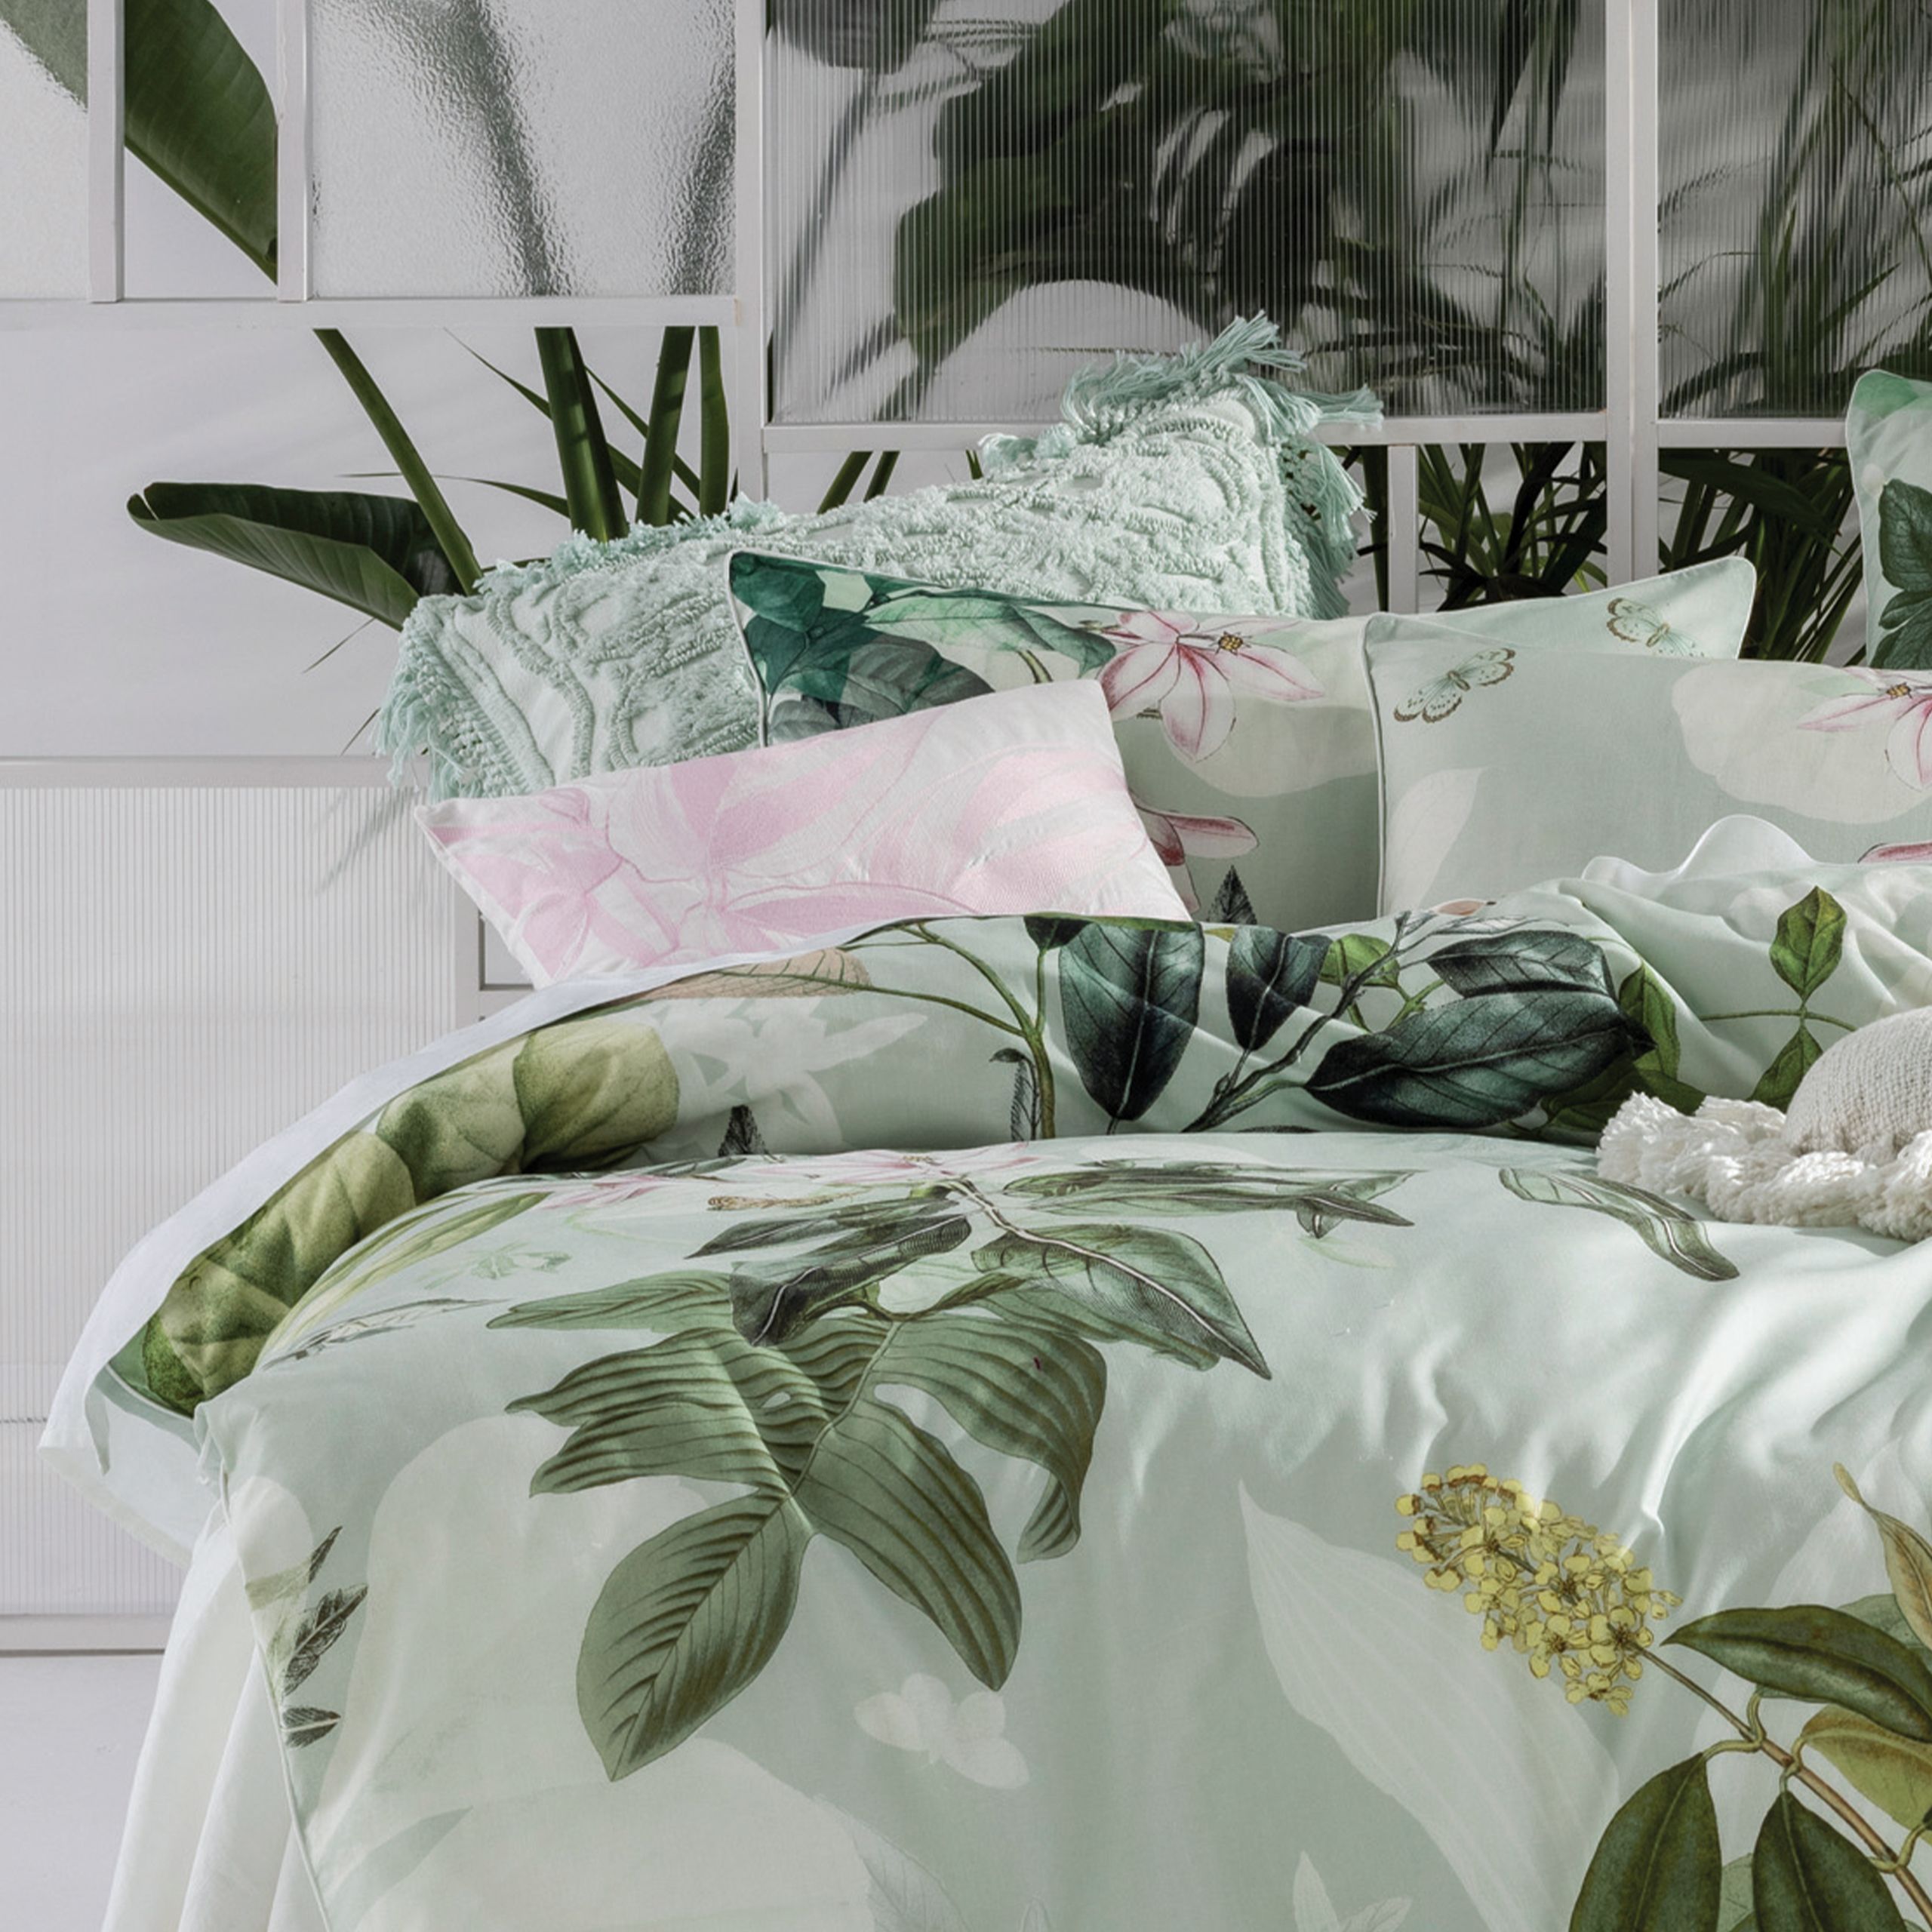 Bring your bedroomto life with Glasshouse, a mint-hued and contemporary collage of lush, tropical botanicals. Digitally printed on a luxurious cotton slub, this duvet cover set is trimmed with white cord piping. The archival-styled design looks best when adorned with its coordinating European pillowcases and colour-popping pink cushion.